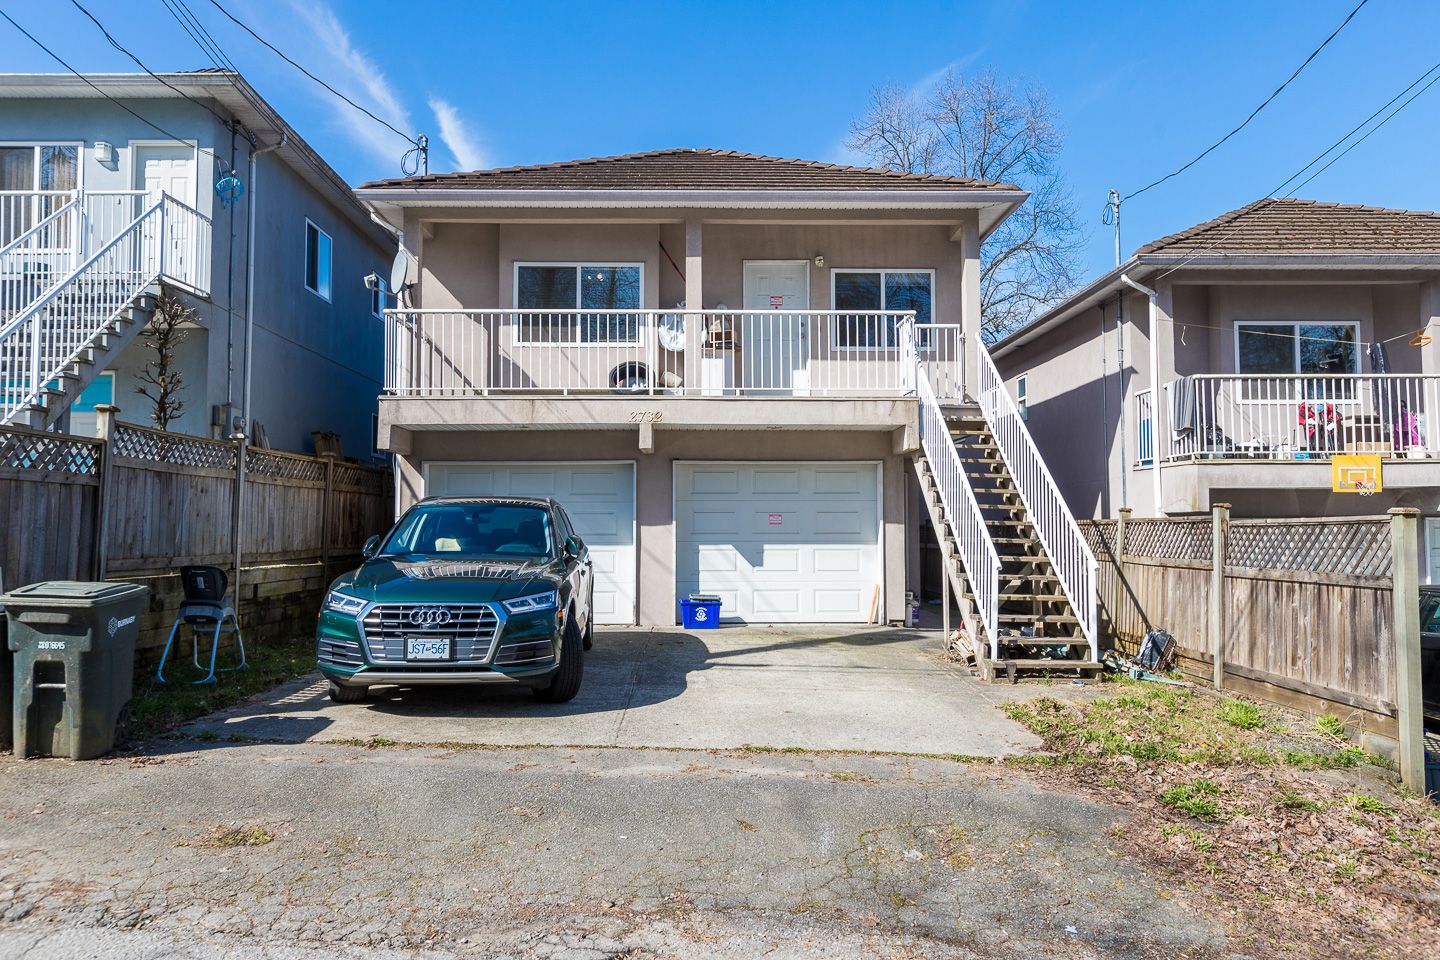 Photo 21: Photos: 2732 BOUNDARY RD in BURNABY: Central BN House for sale (Burnaby North)  : MLS®# R2559492